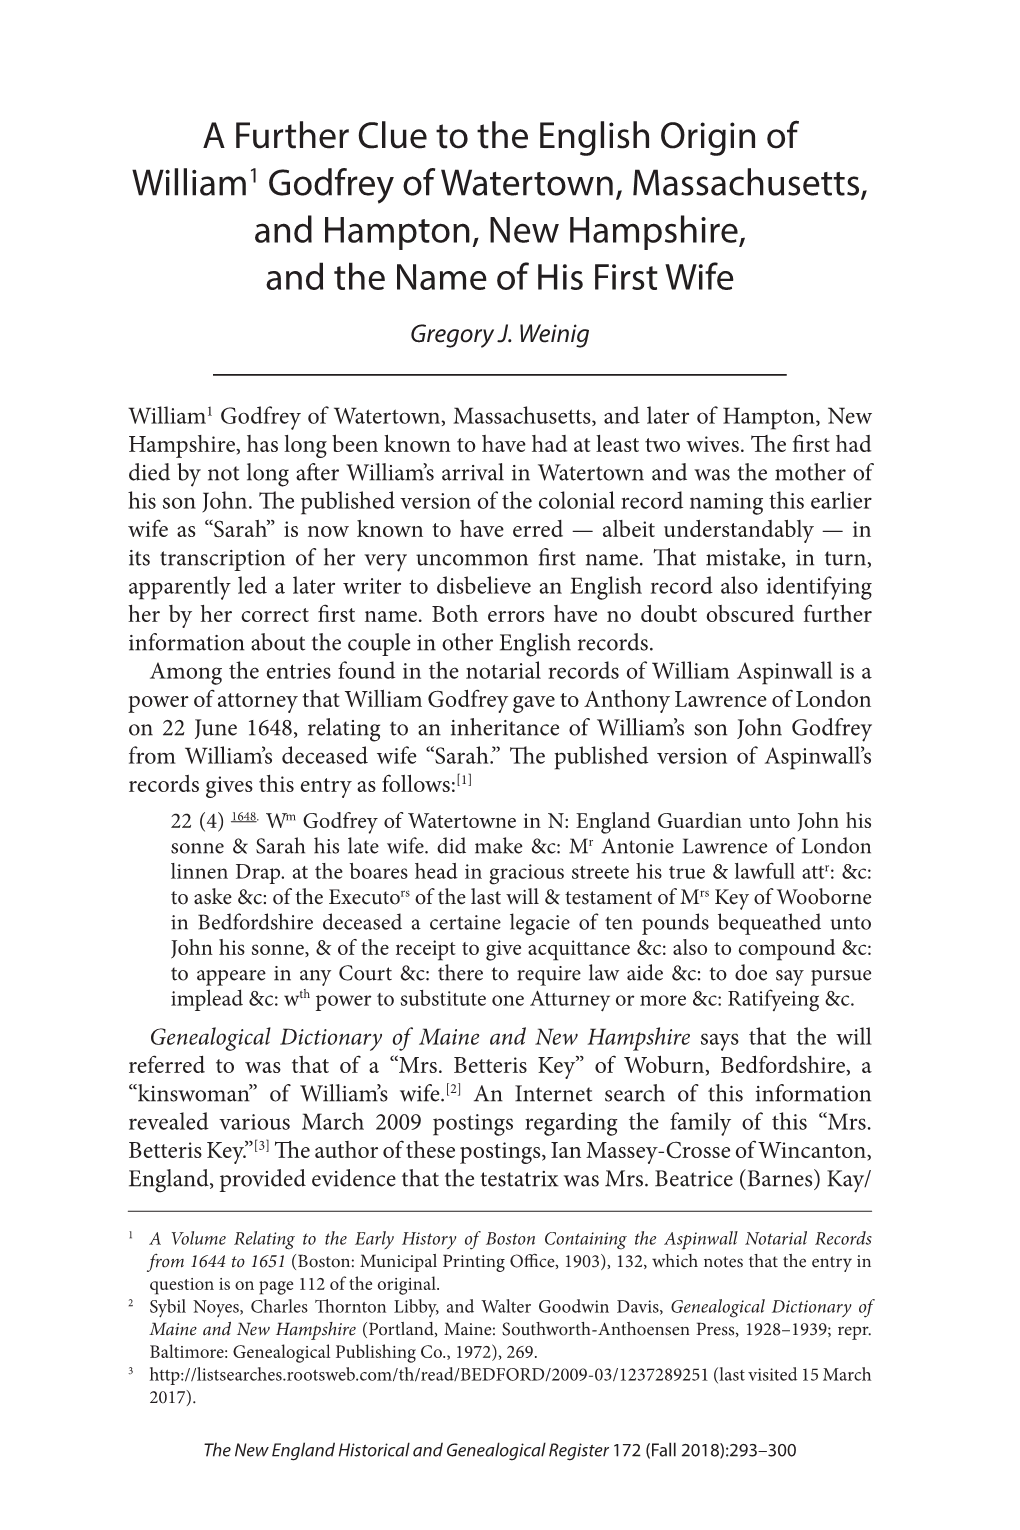 A Further Clue to the English Origin of William1 Godfrey of Watertown, Massachusetts, and Hampton, New Hampshire, and the Name of His First Wife Gregory J